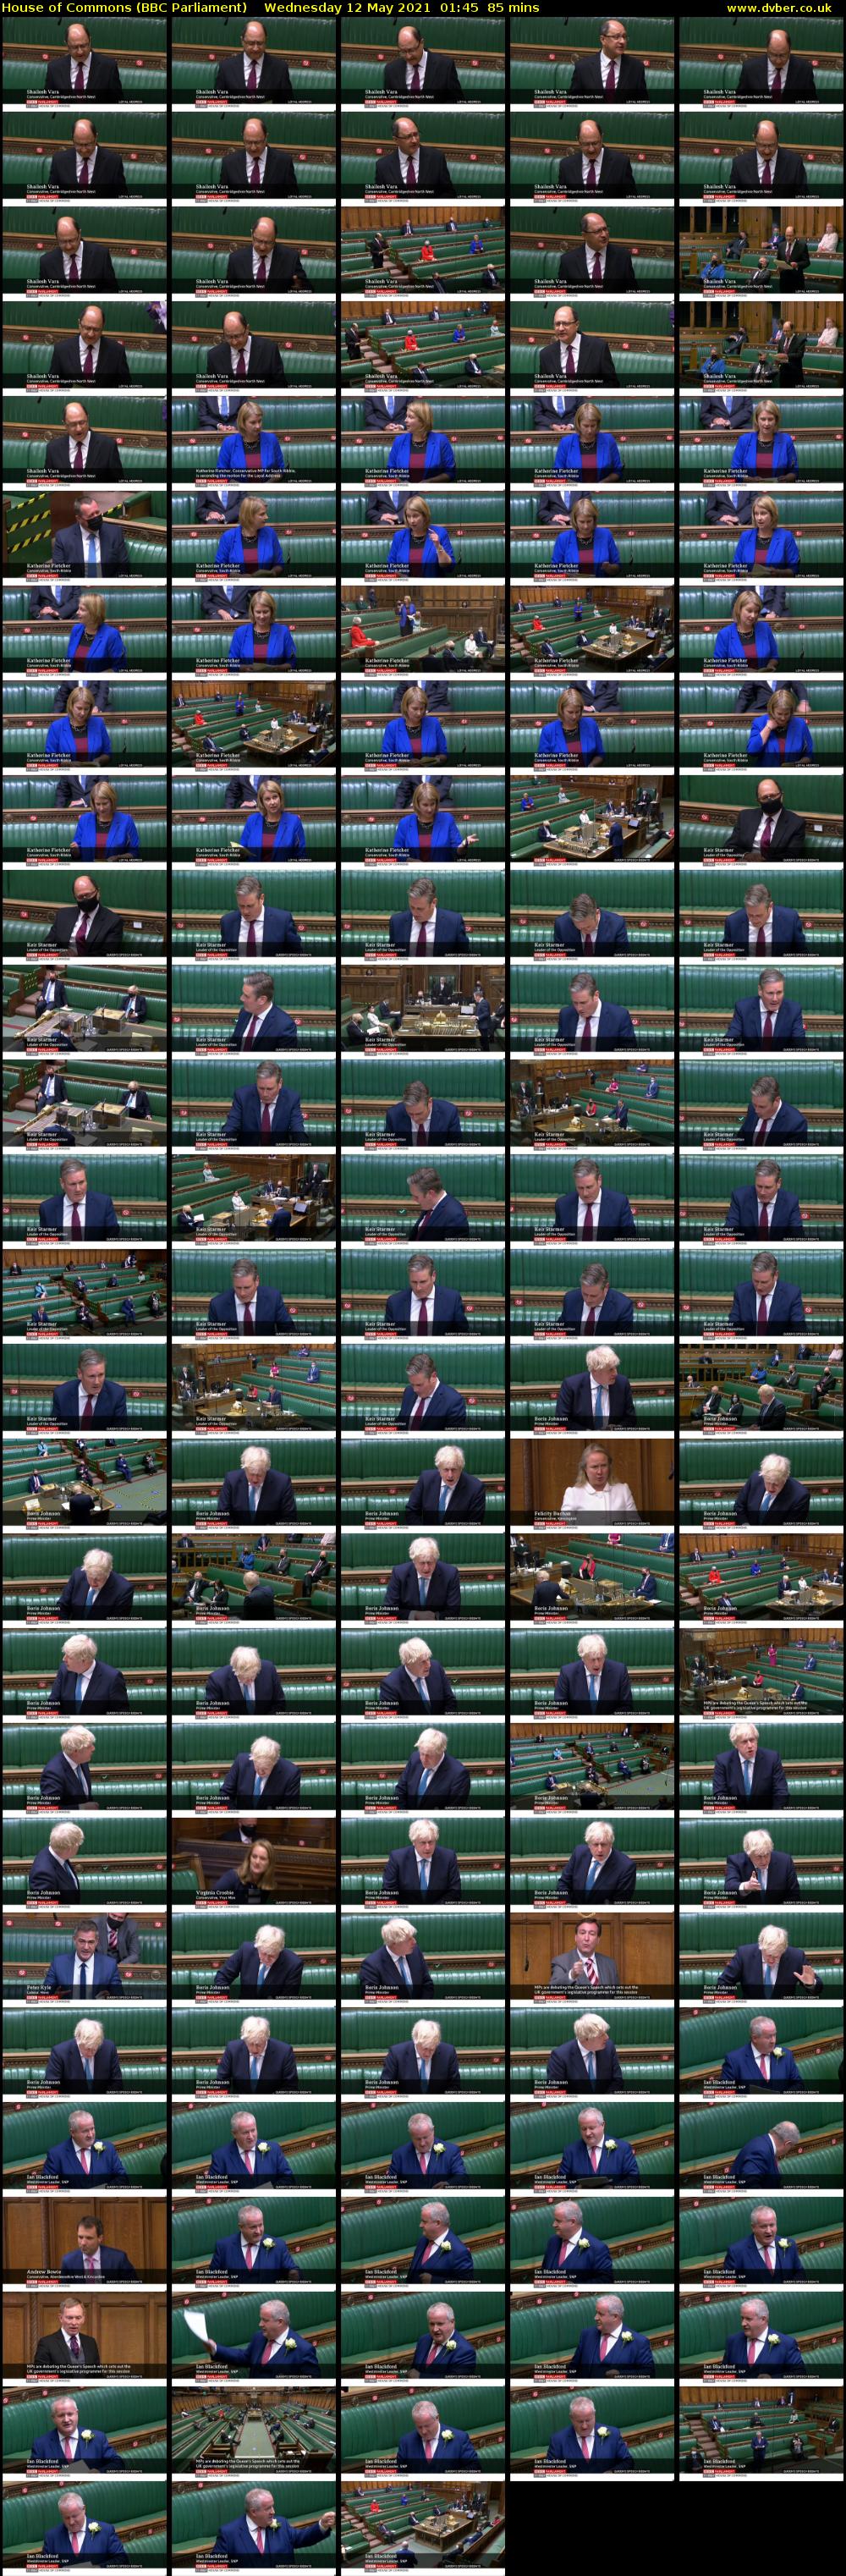 House of Commons (BBC Parliament) Wednesday 12 May 2021 01:45 - 03:10